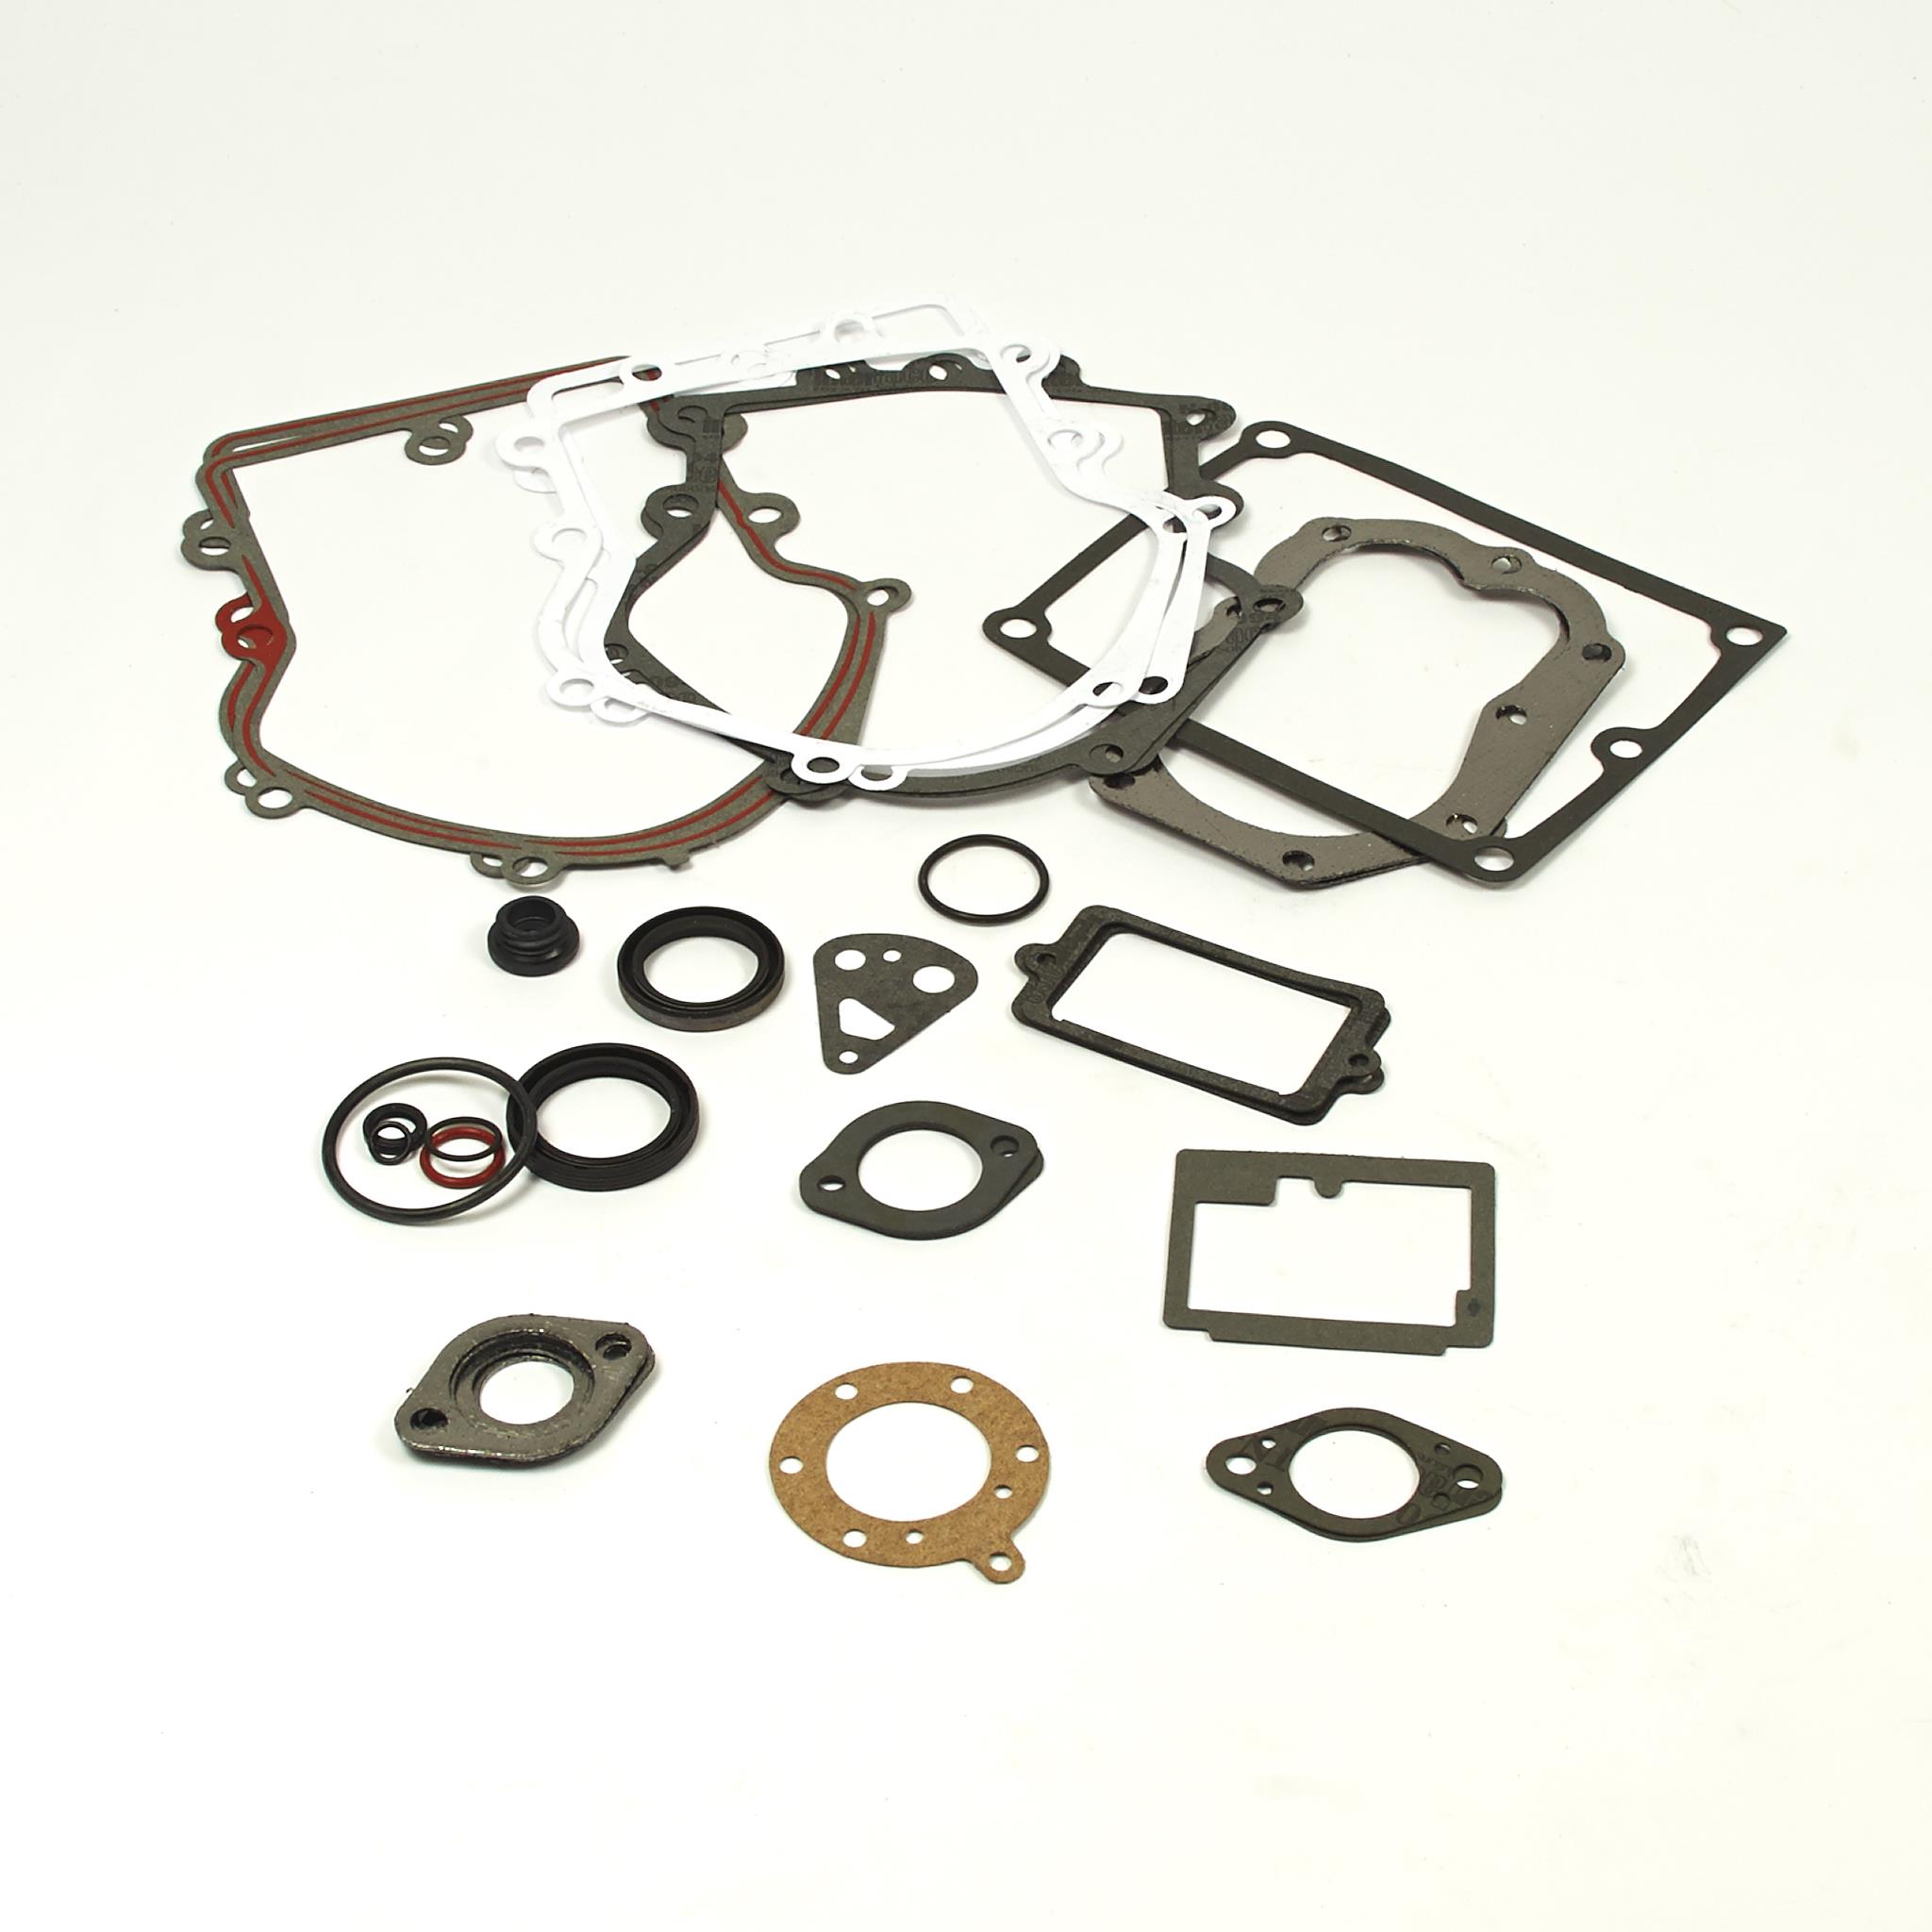 Details about   New Engine Gasket Set 796181 Fit Briggs & Stratton Replaces 697151 US Stock 